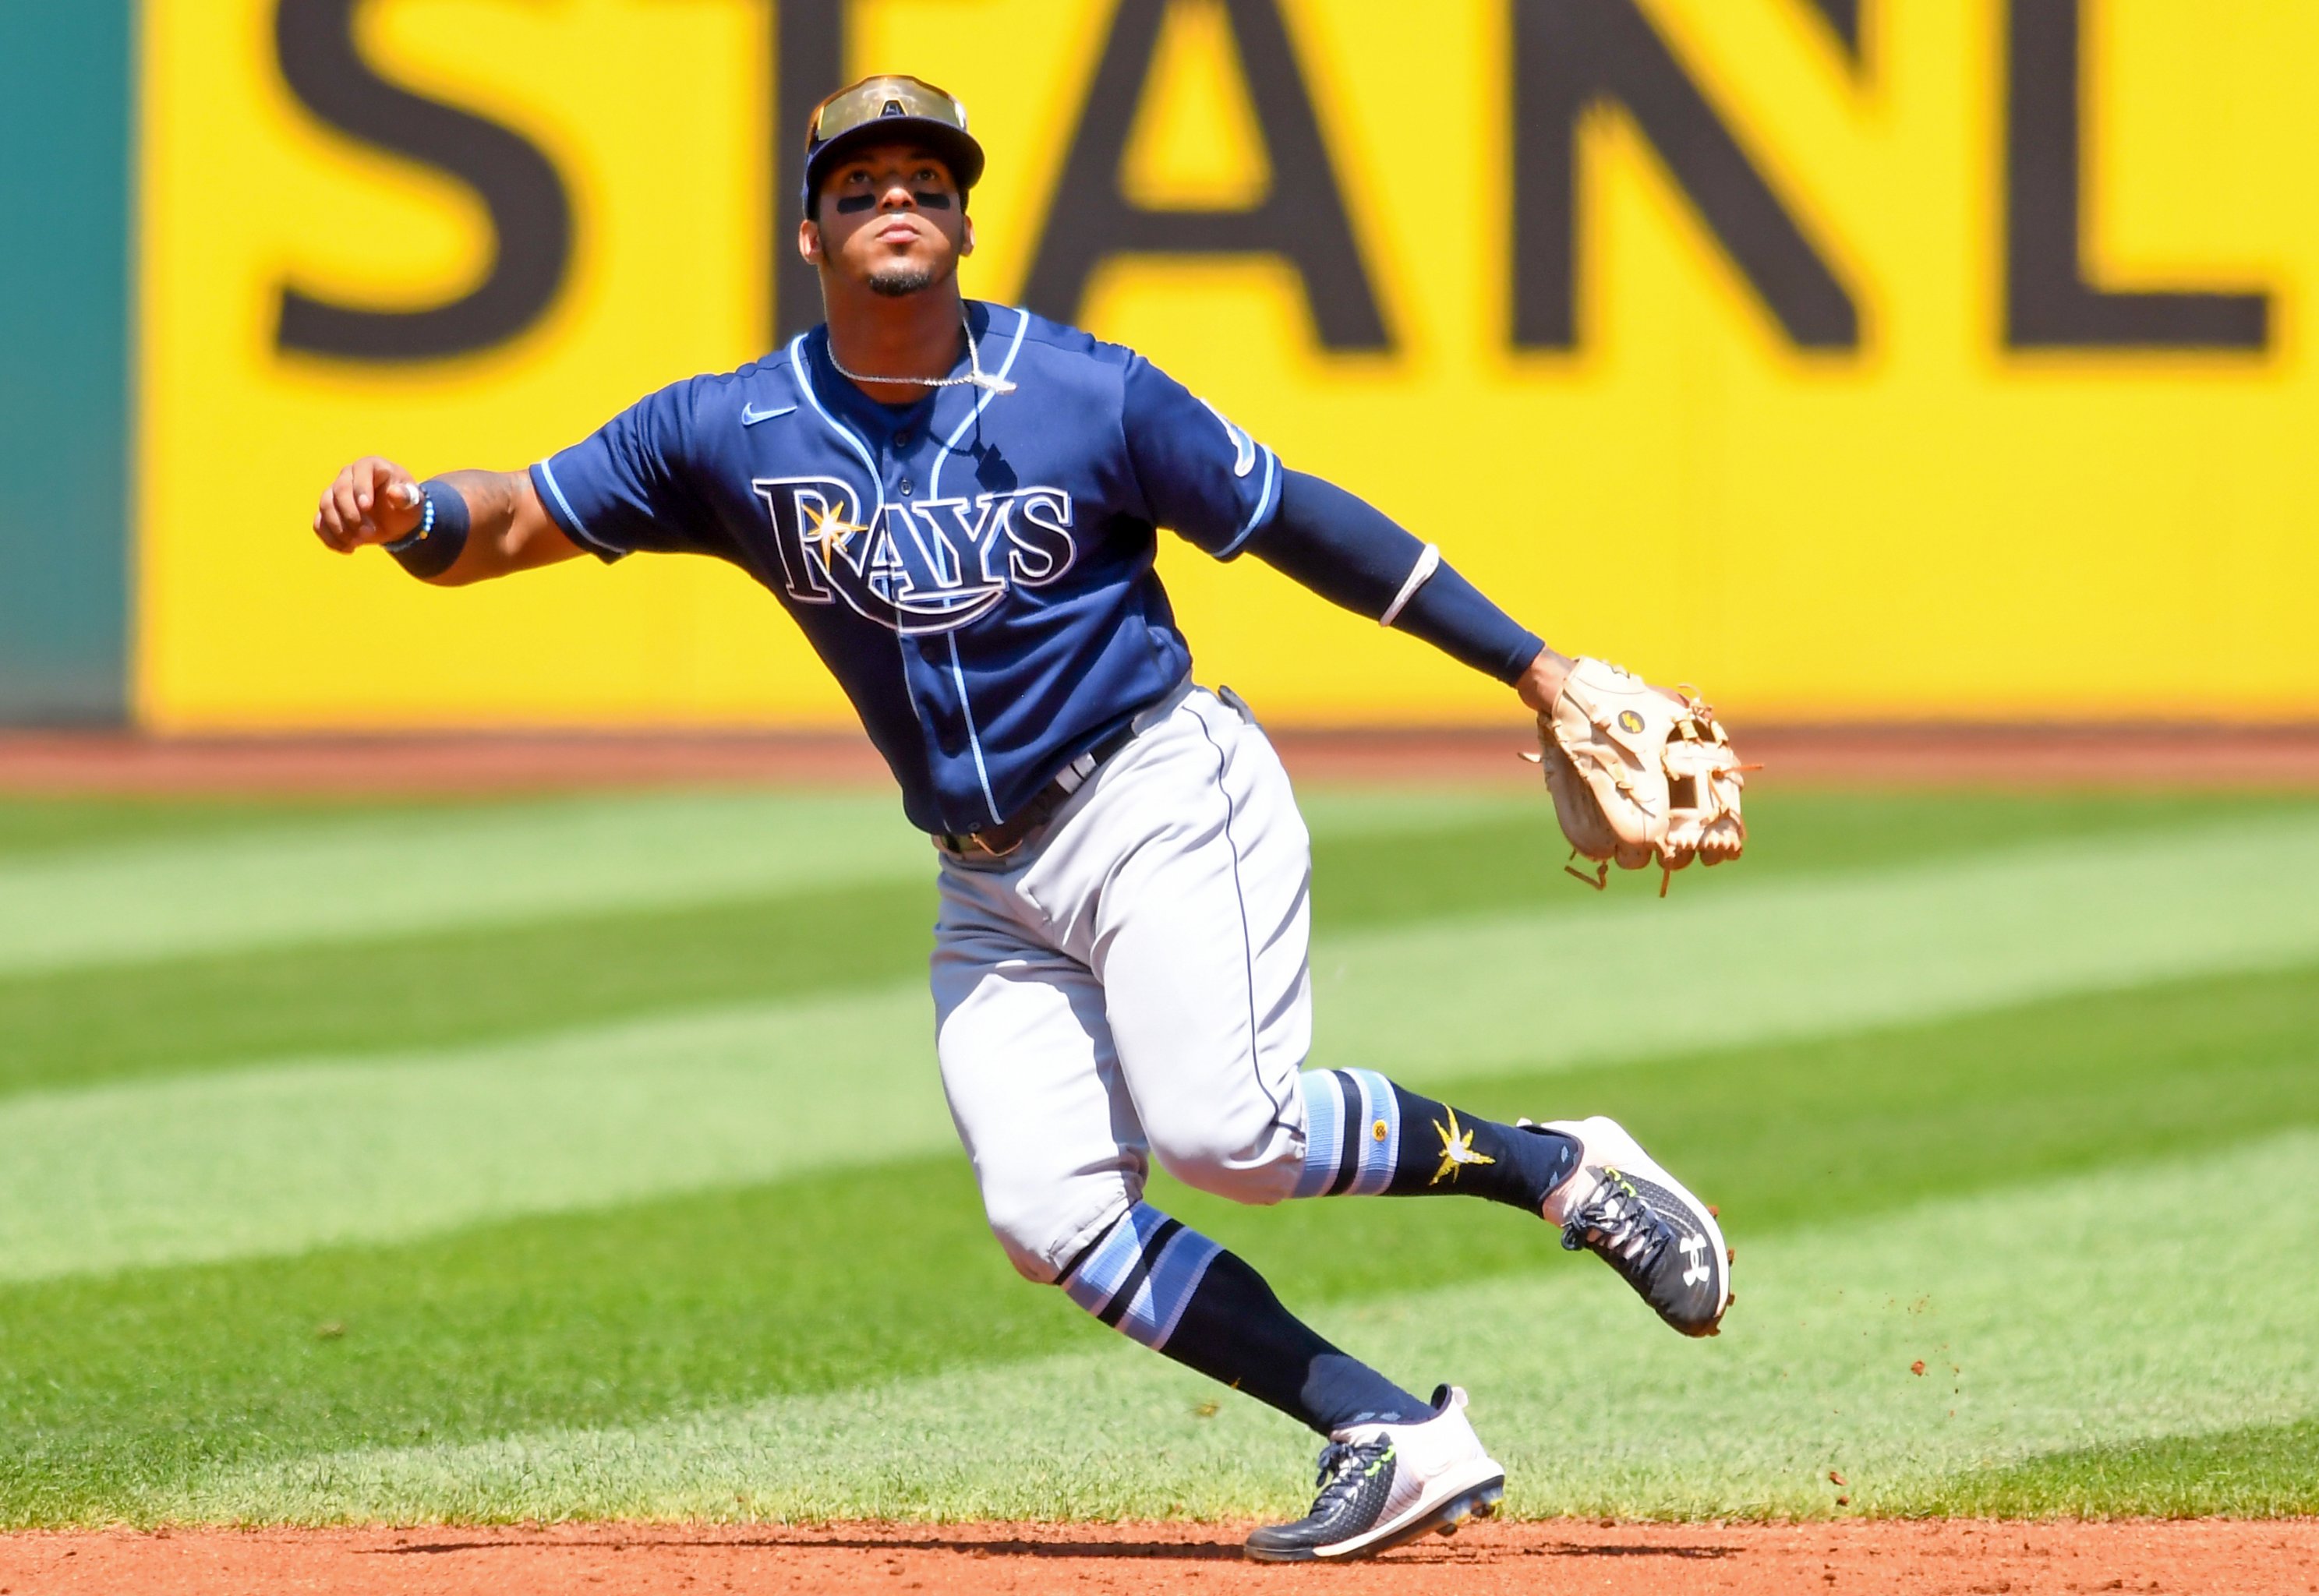 As MLB rules shift, star shortstops hit free agency. Enticing